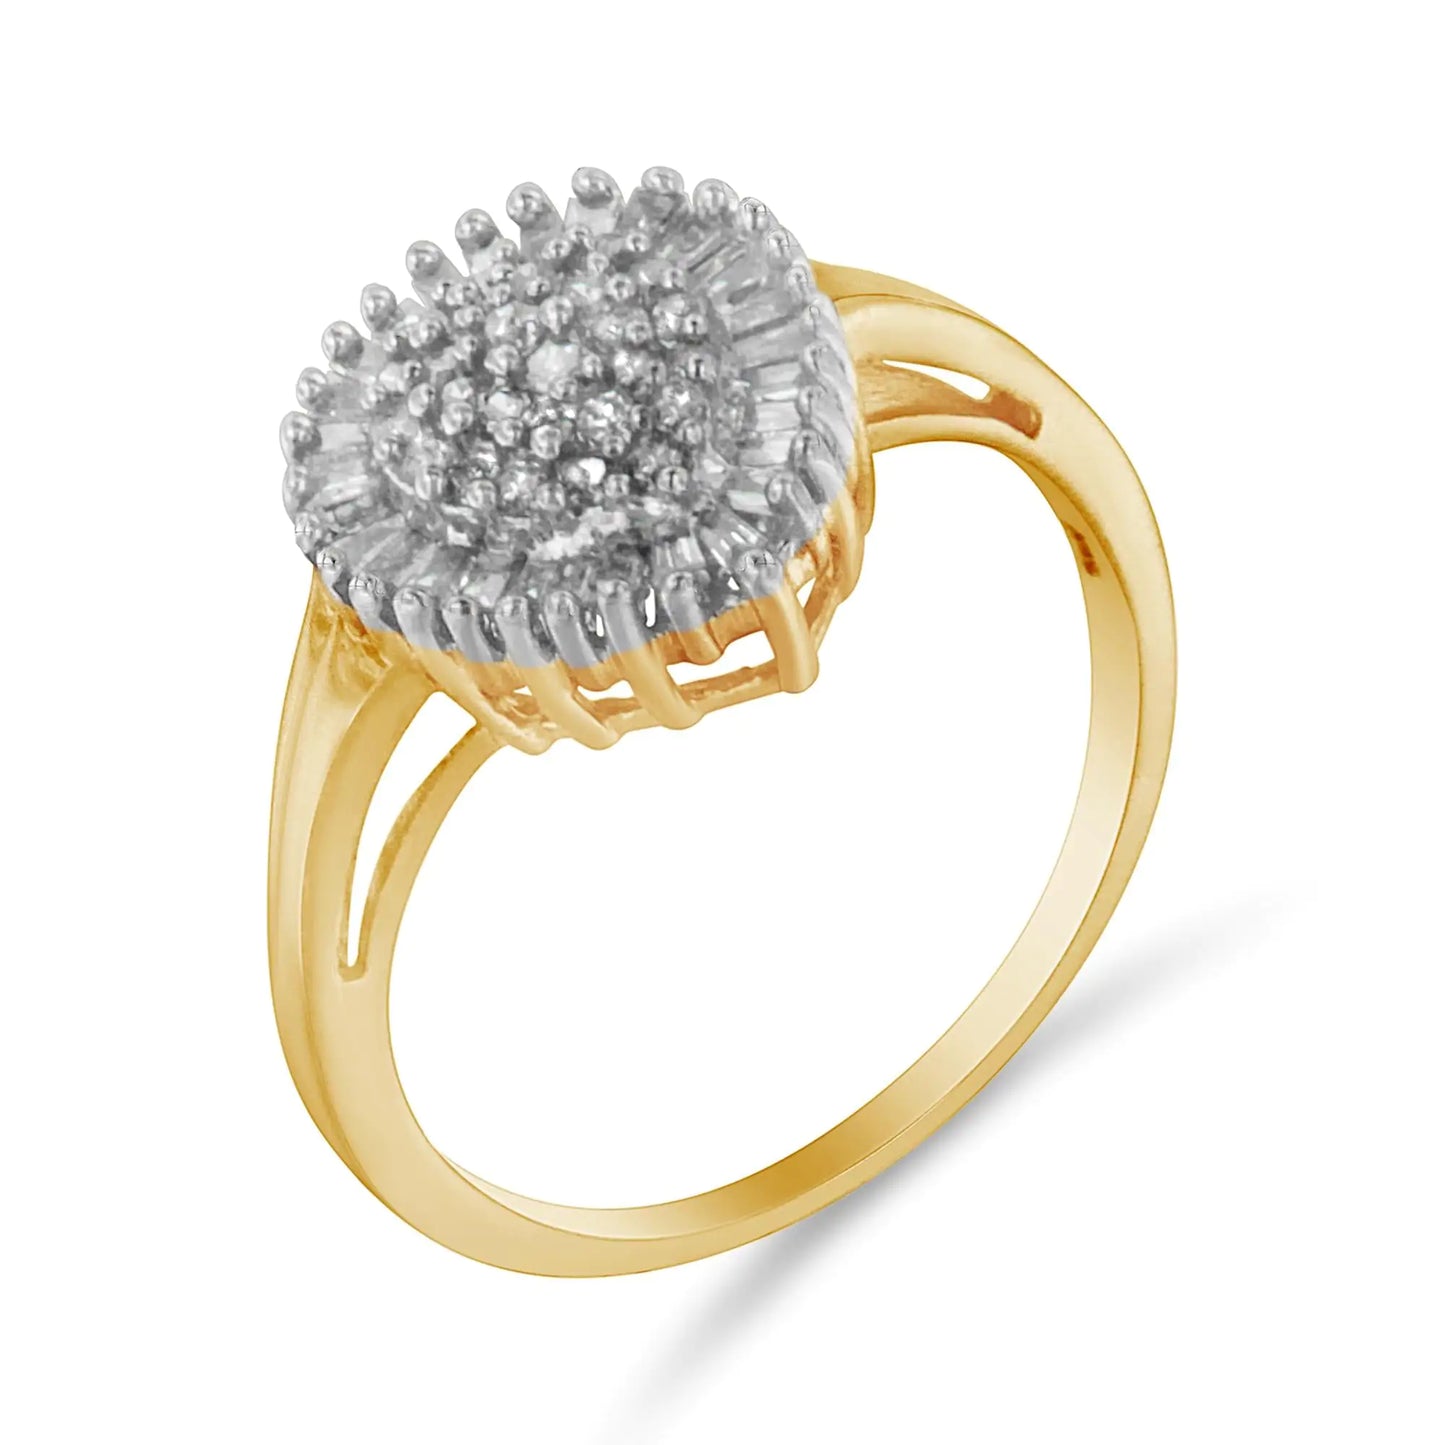 10K Yellow Gold 1/2 Cttw Round & Baguette Cut Diamond Pear Shaped Domed Pavé Cluster with Halo Cocktail Ring (J-K Color, I1-I2 Clarity)